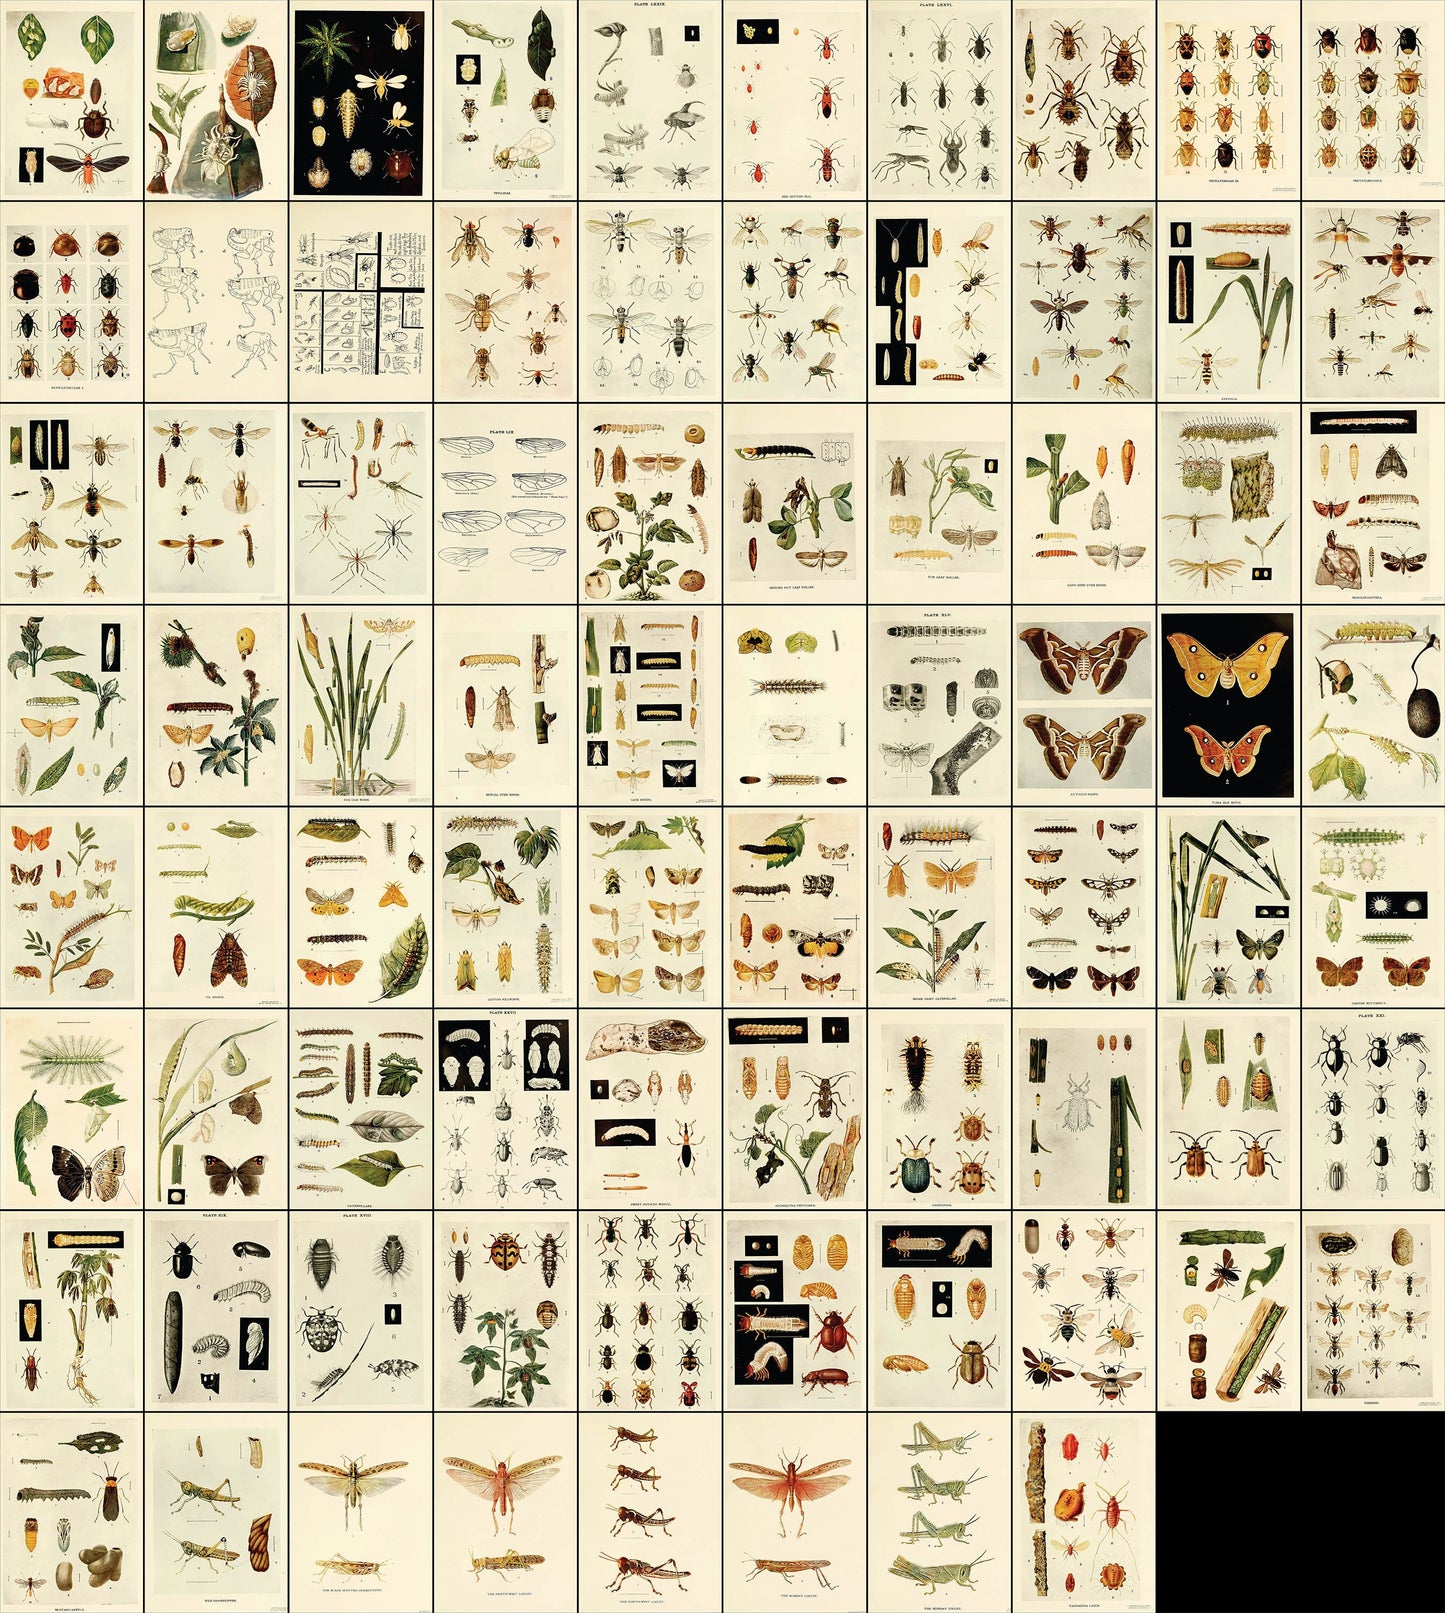 Tropical Indian Insect Life: a manual of the insects of the plains [78 Images]